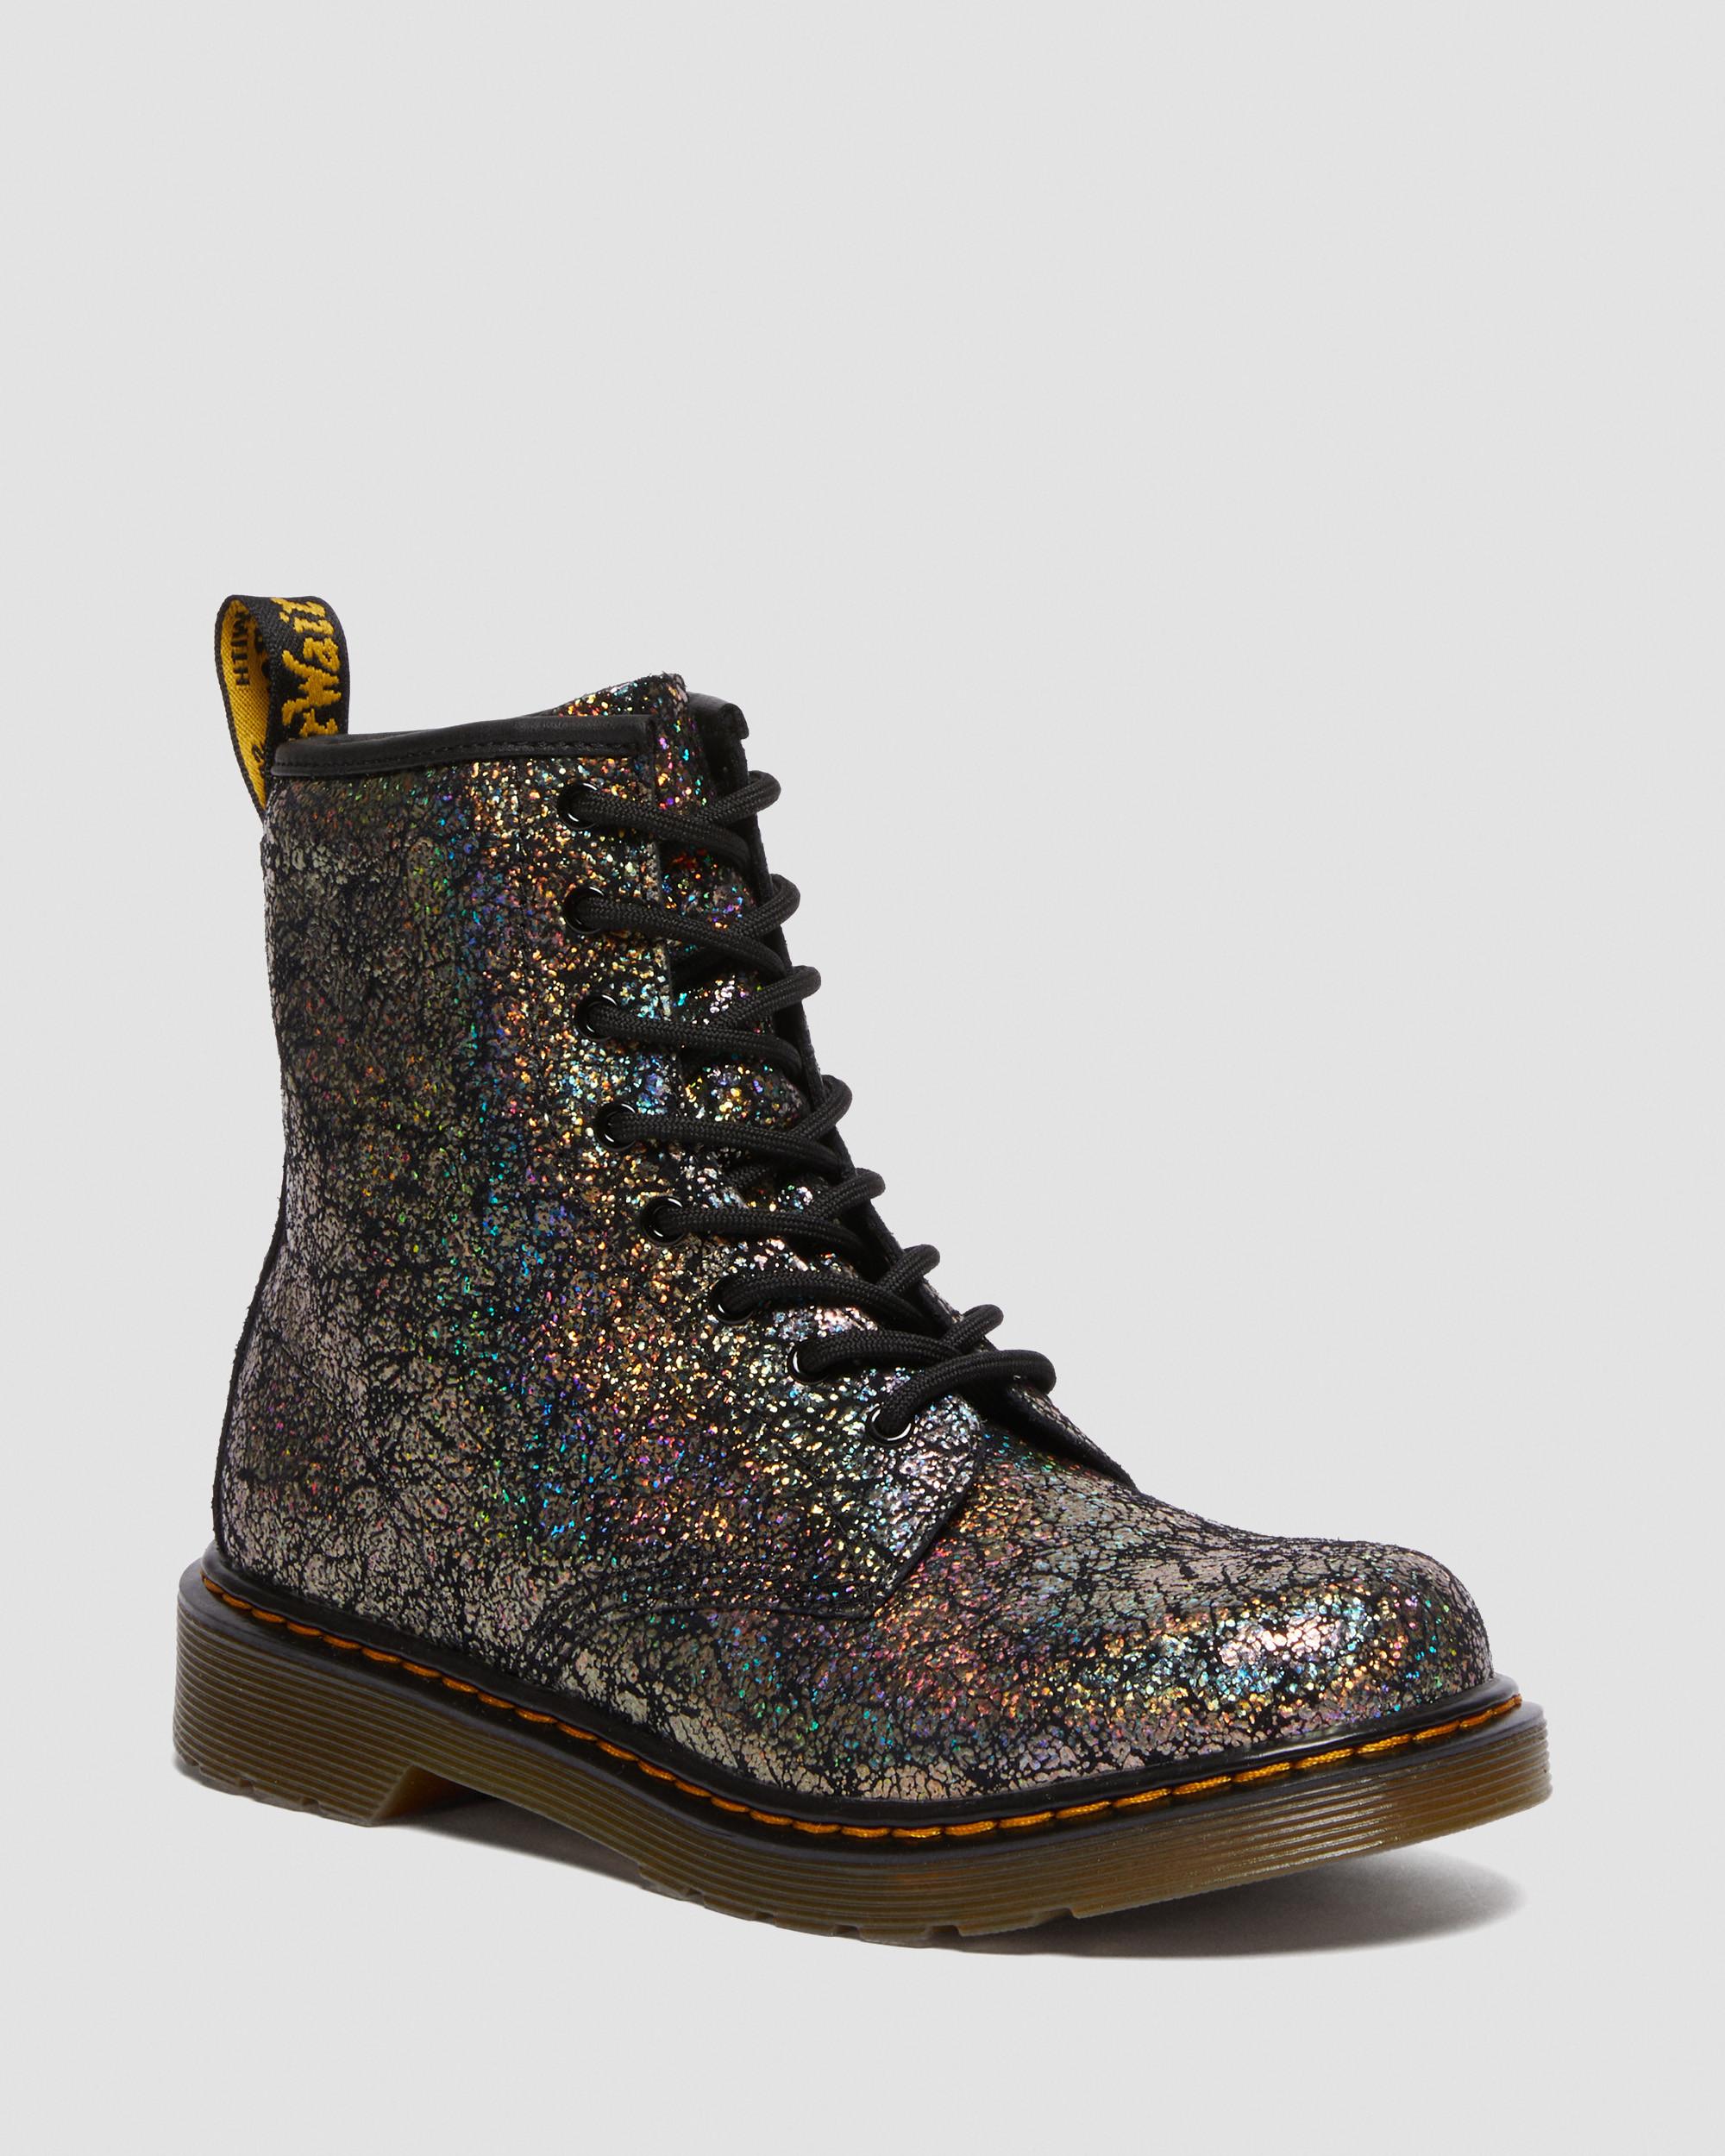 Th Weg huis Perth Blackborough Youth 1460 Crinkle Metallic Lace Up Boots | Dr. Martens